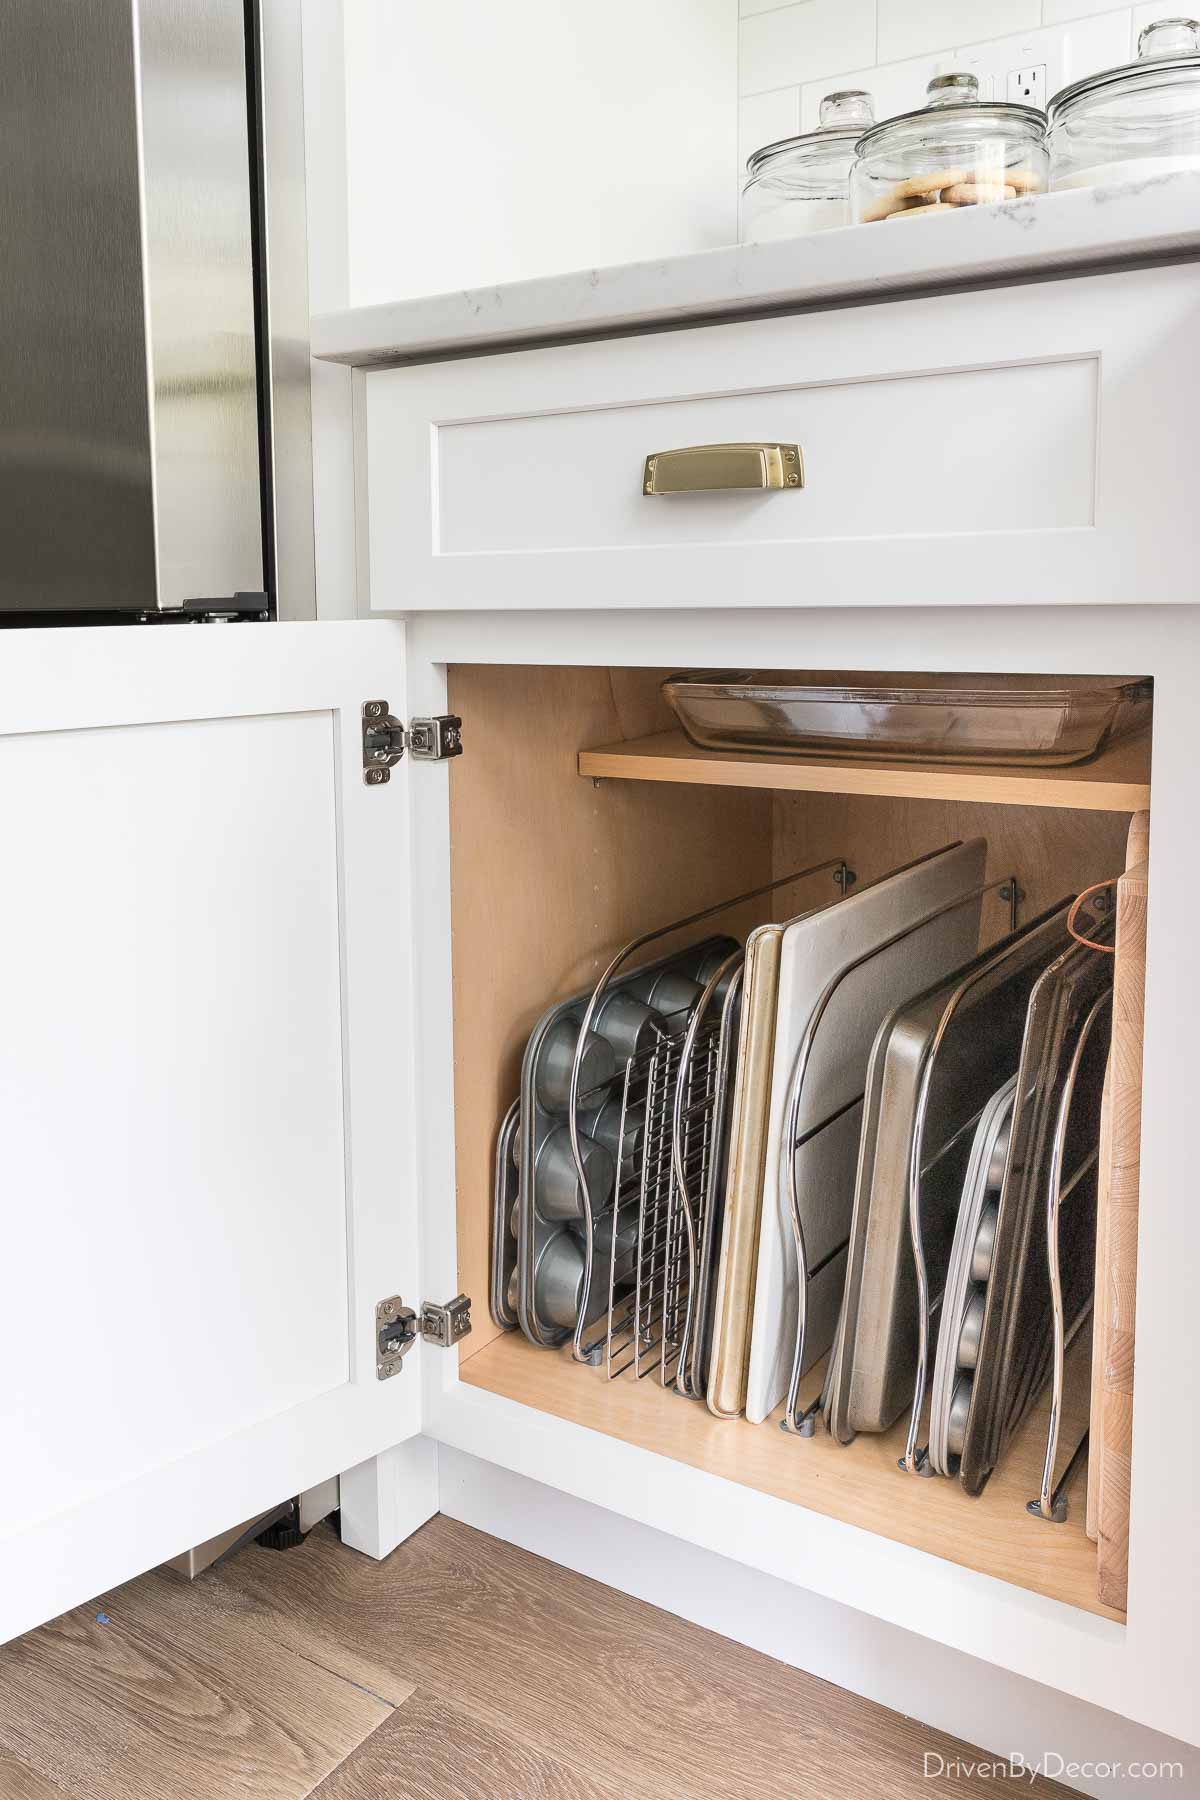 Cabinet dividers for organizing trays and sheets in your kitchen